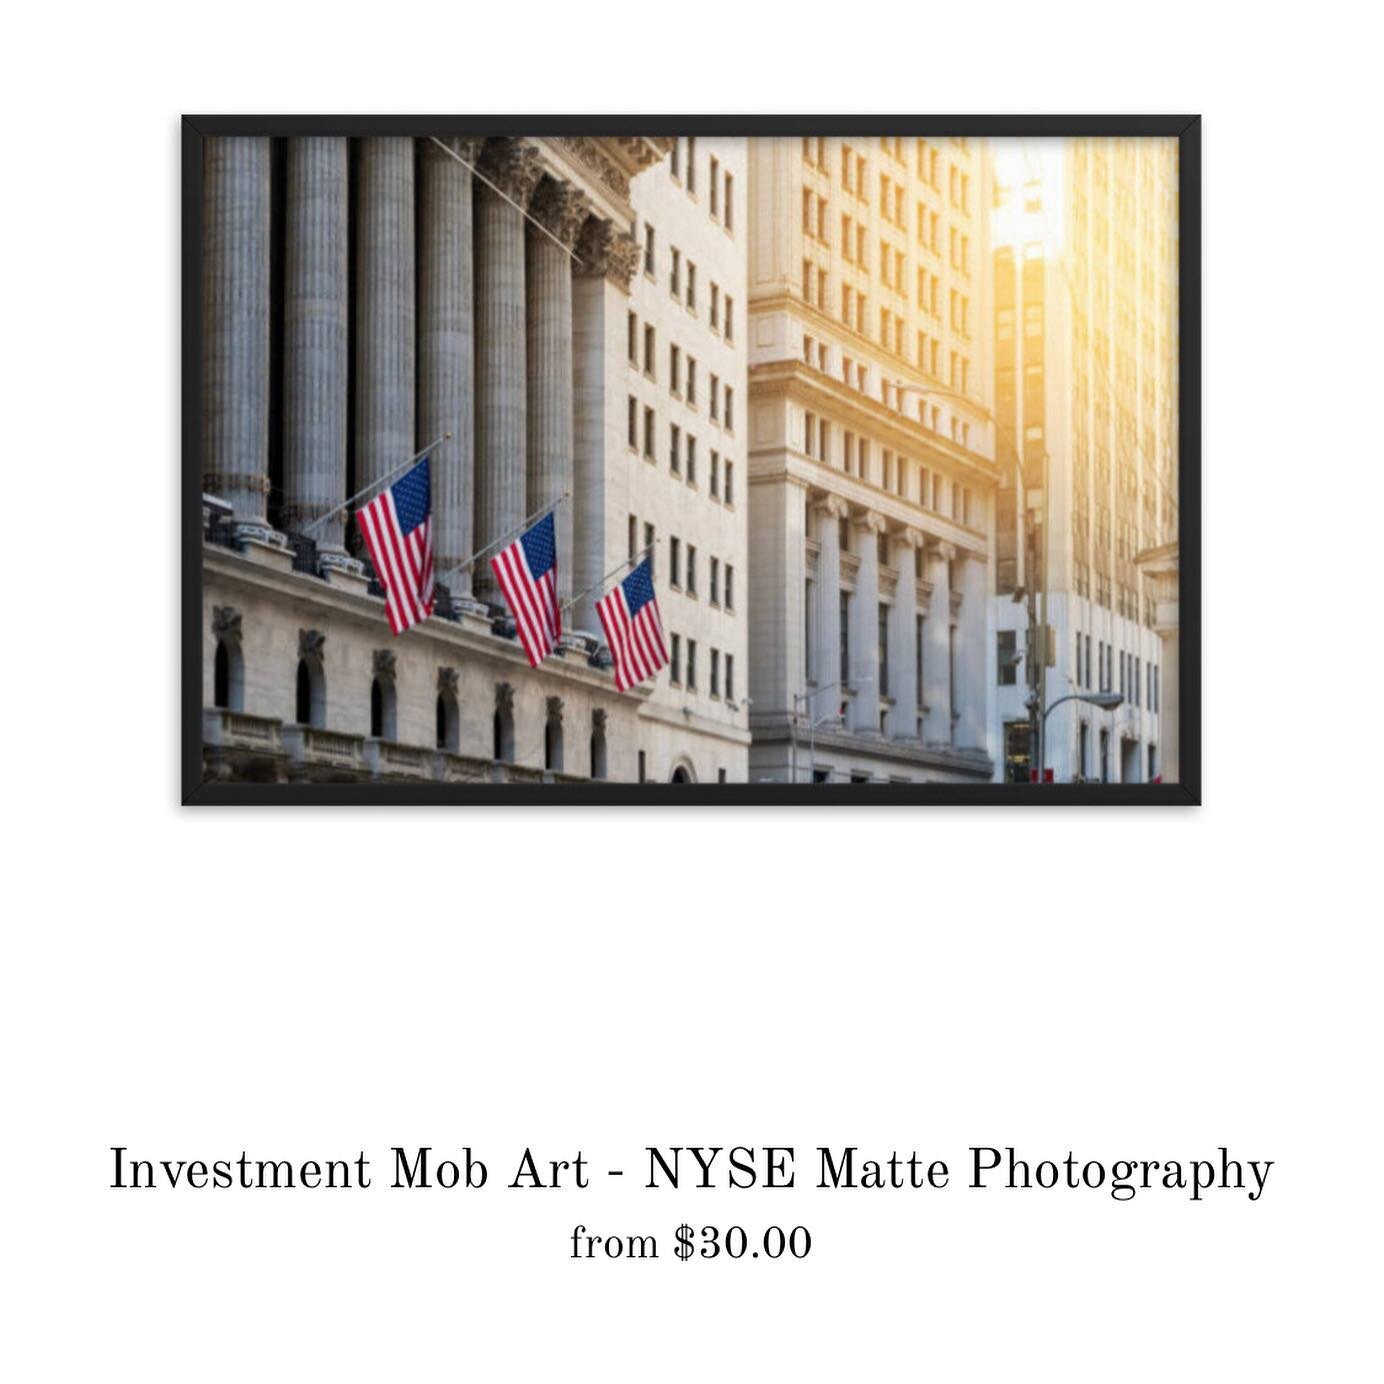 Add some Wall St. photography to your office that will surely give the environment that classy touch your looking for. Available exclusively at Investmentmob.com